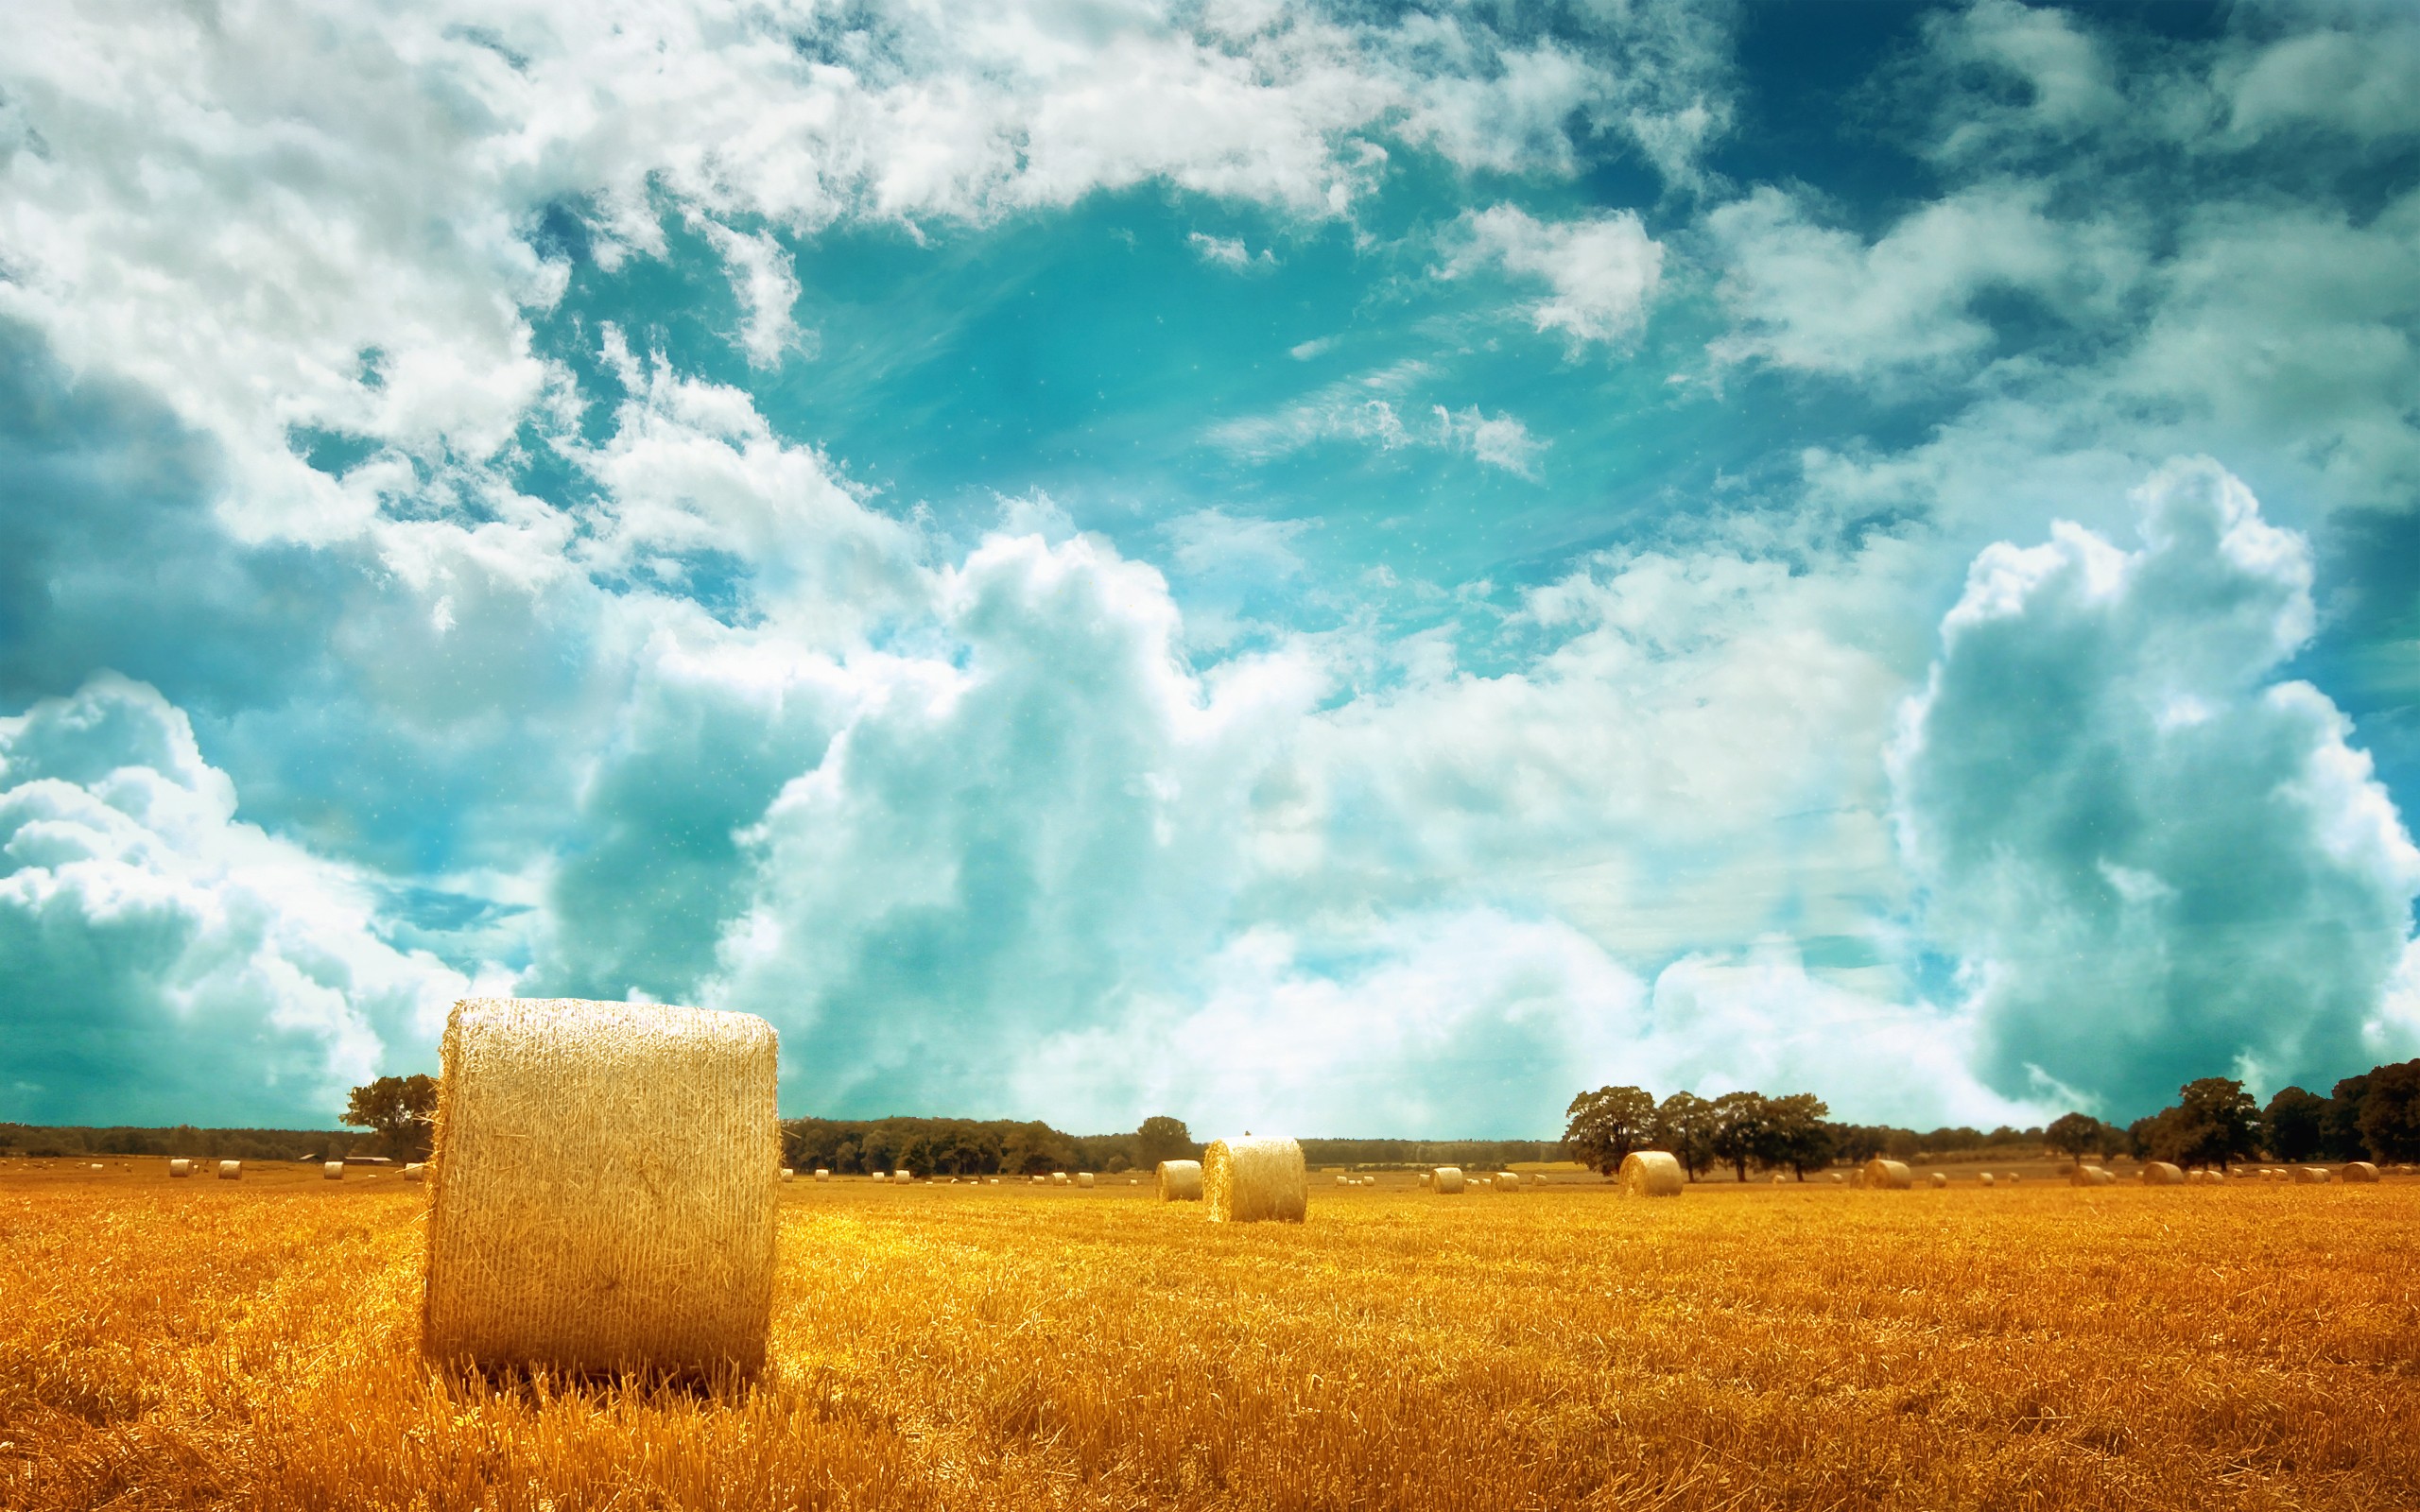 General 2560x1600 landscape nature sky field clouds haystacks plants outdoors plains filter hay bales